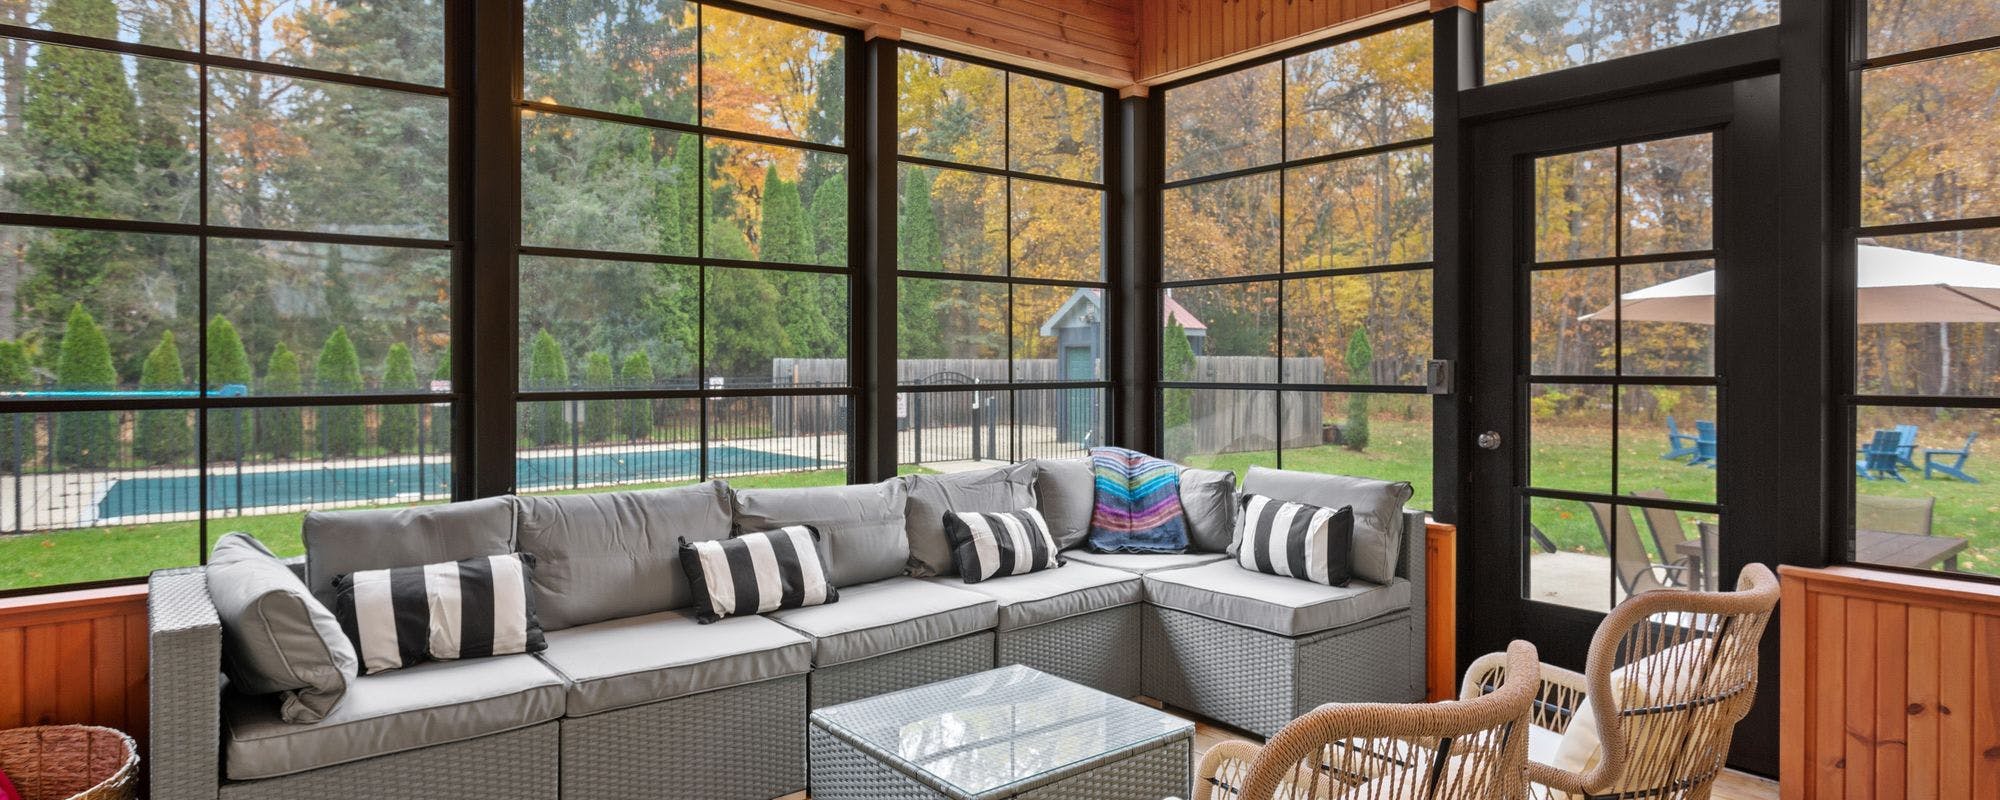 Plenty of outdoor living space at this Southwest Michigan vacation rental